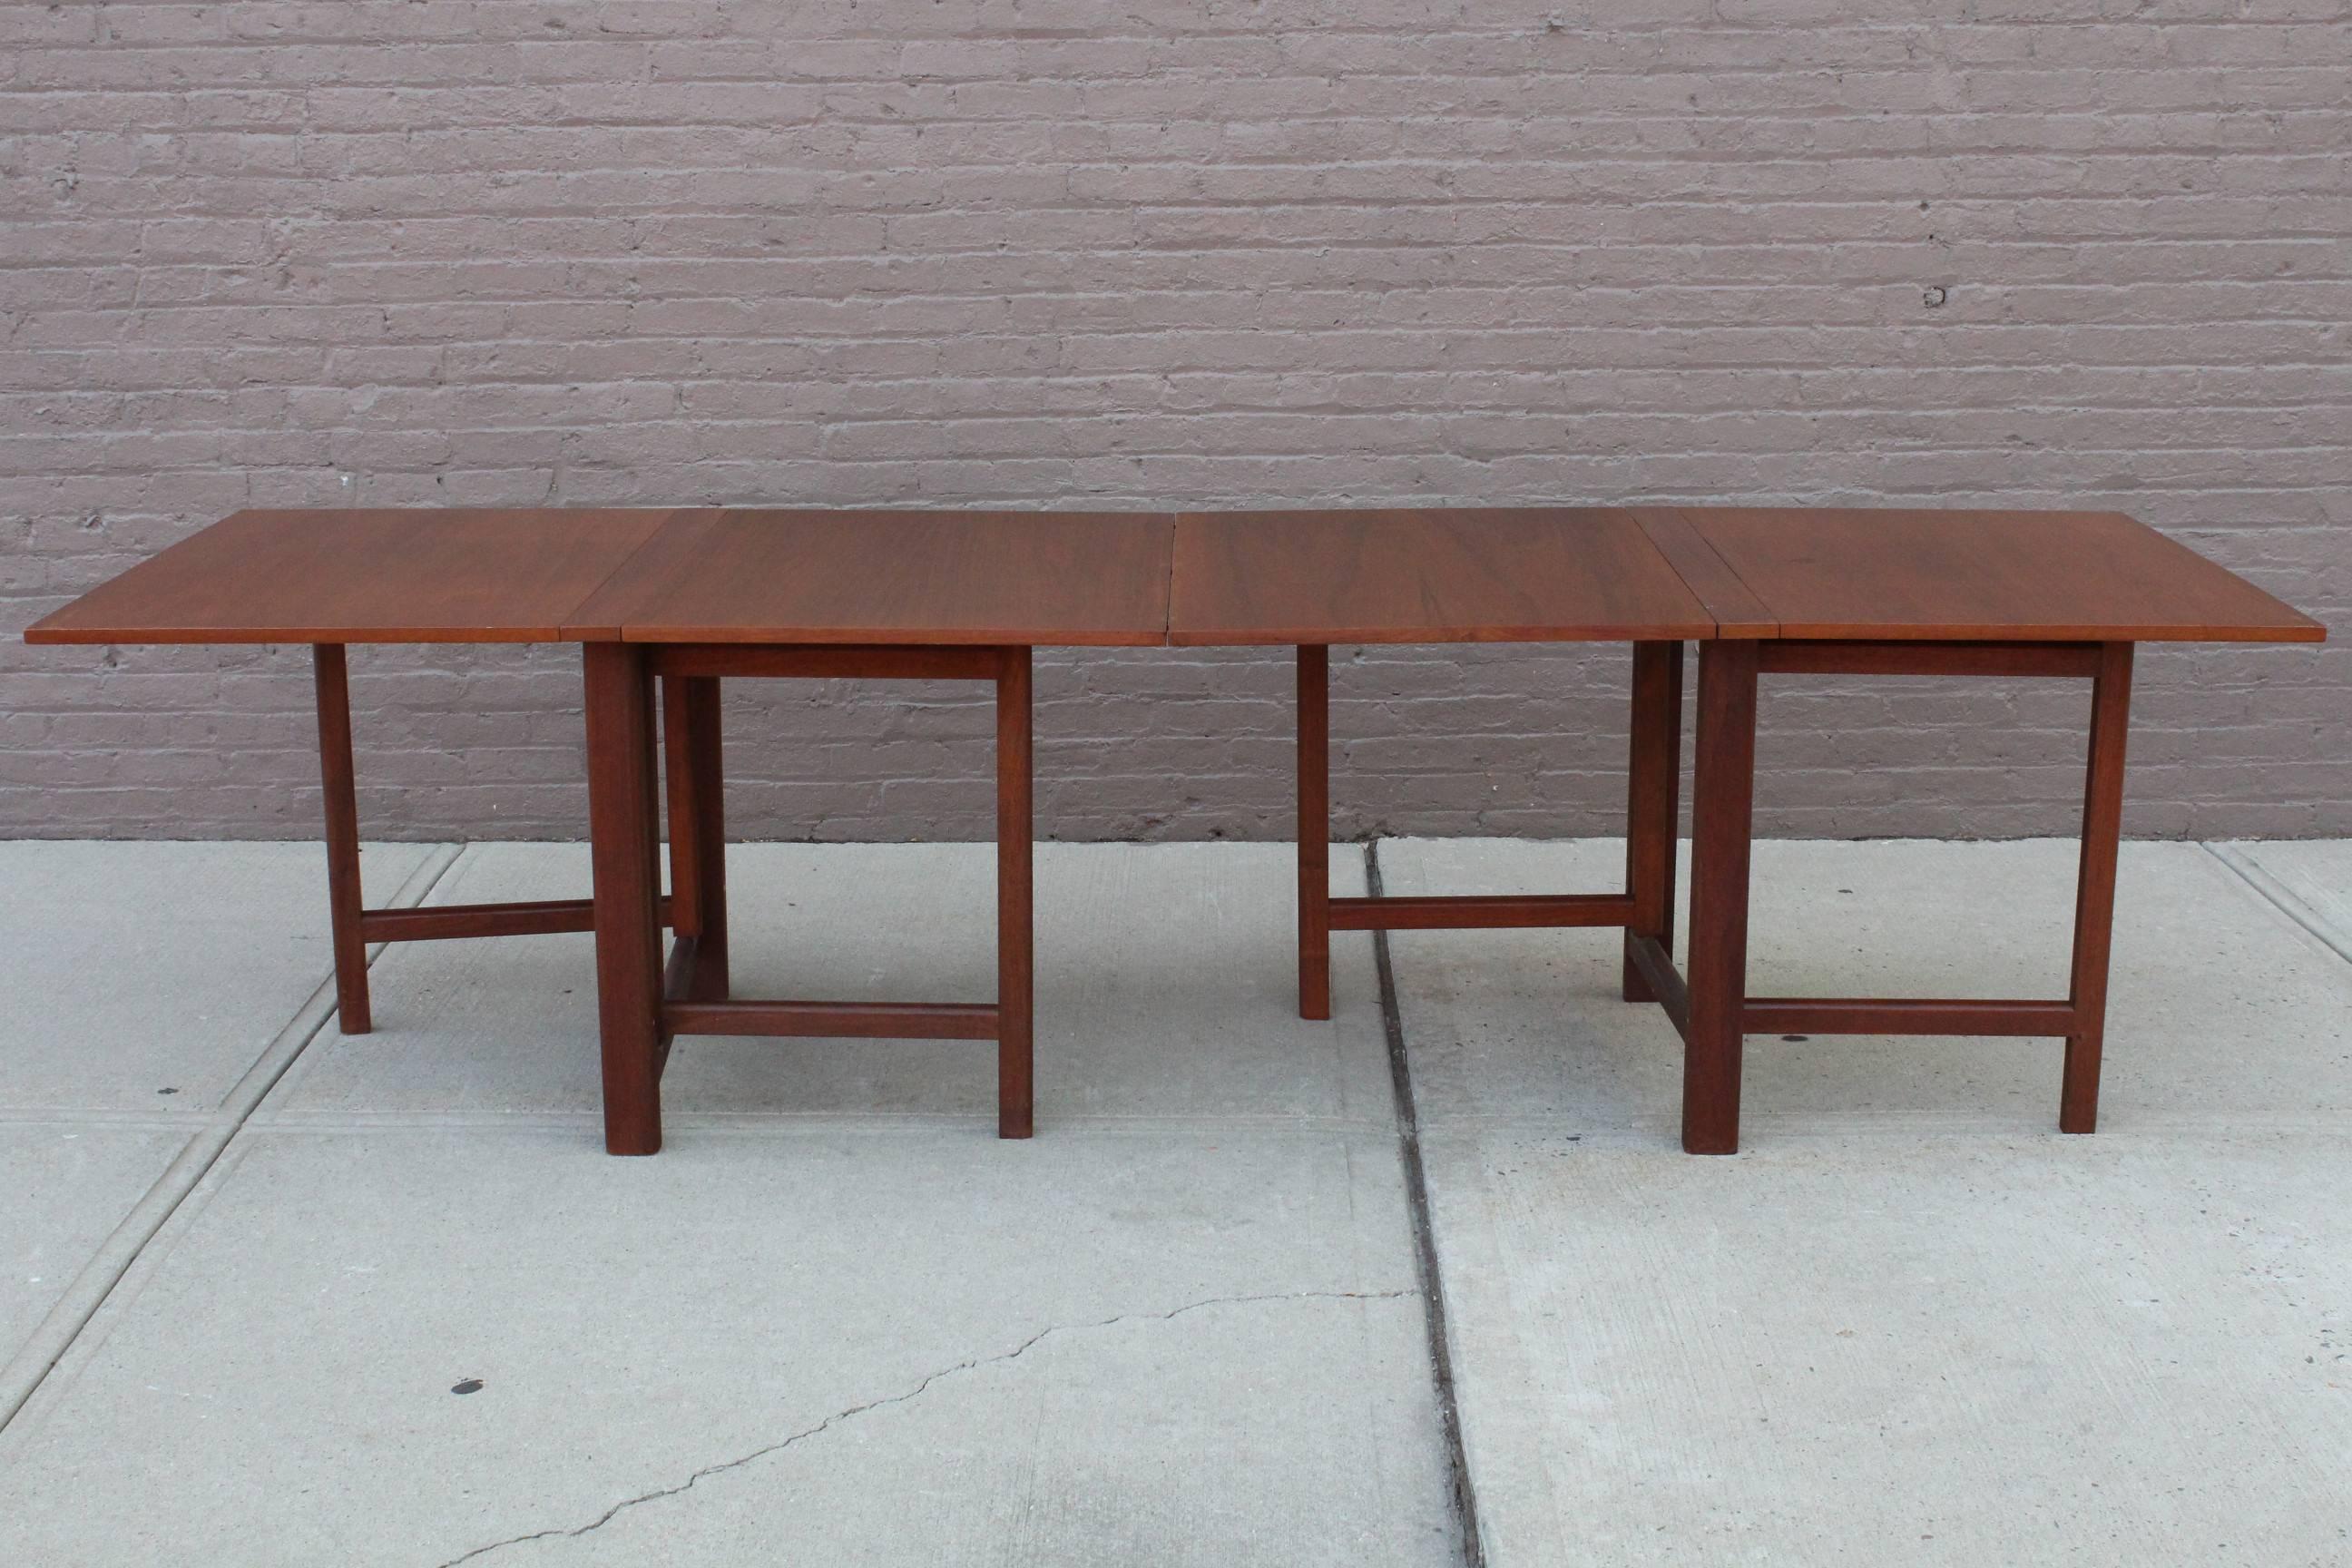 The 'Maria' teak wood dining table, originally designed by Bruno Mathsson, manufactured in Denmark, circa 1960s, the top comprised of drop leaves on a gateleg base, which enables this piece to be compacted or extended. The table remains in overall